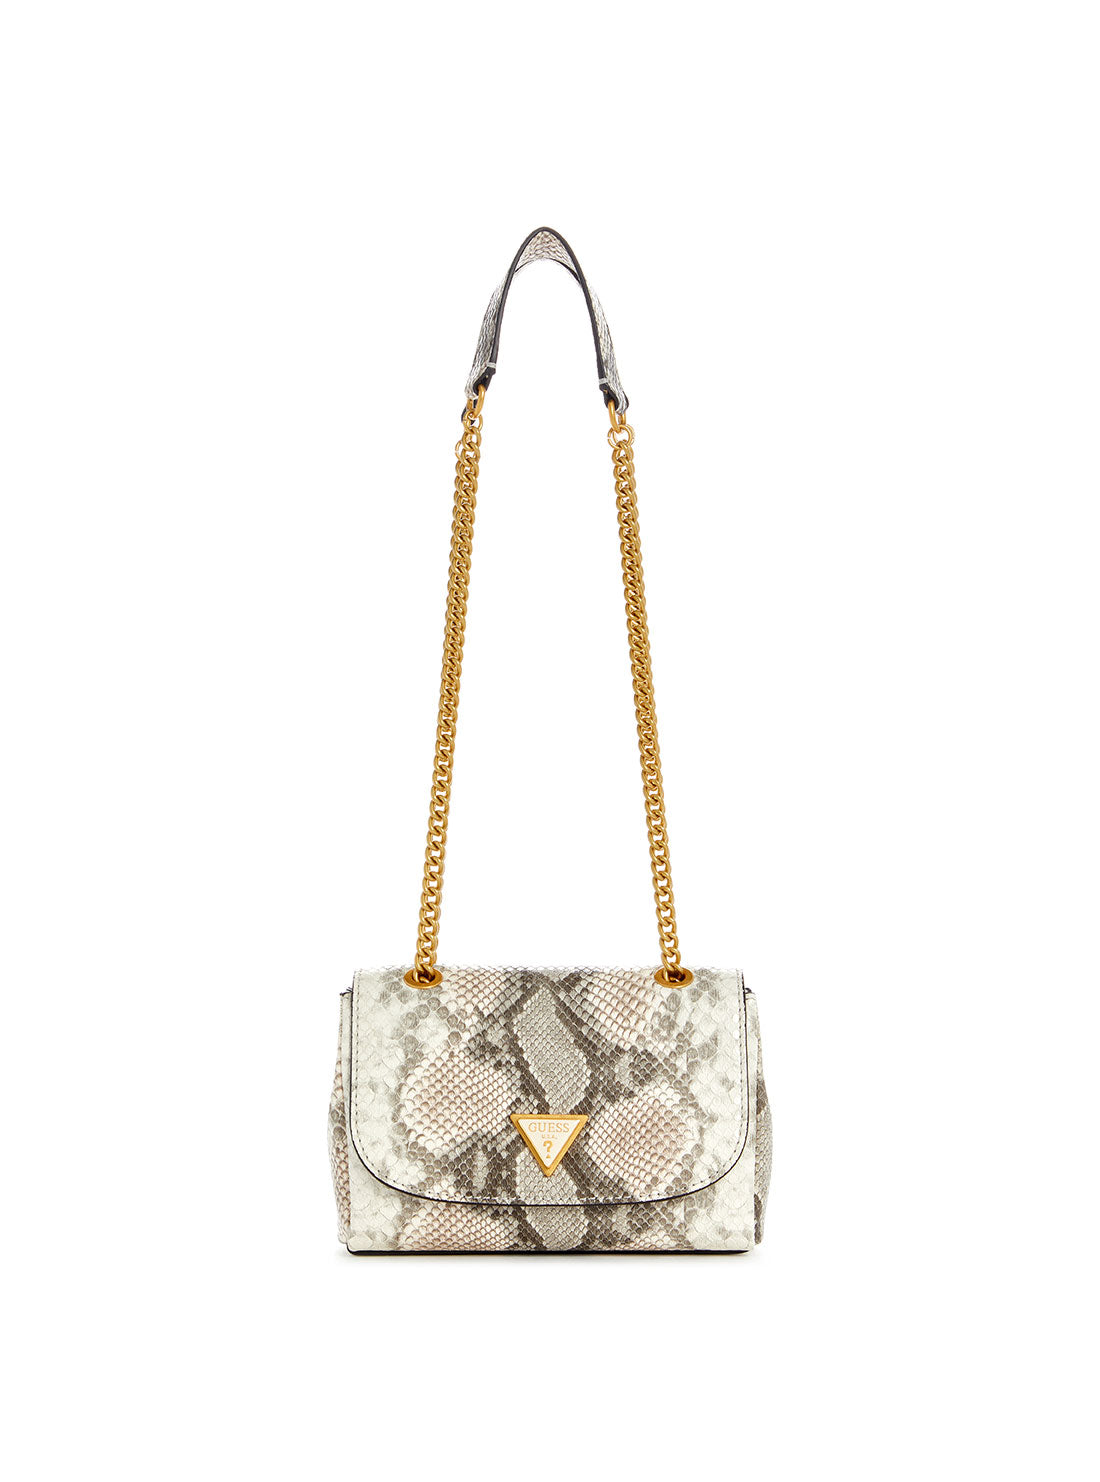 GUESS Taupe Multi Cosette Mini Crossbody Flap Bag front view